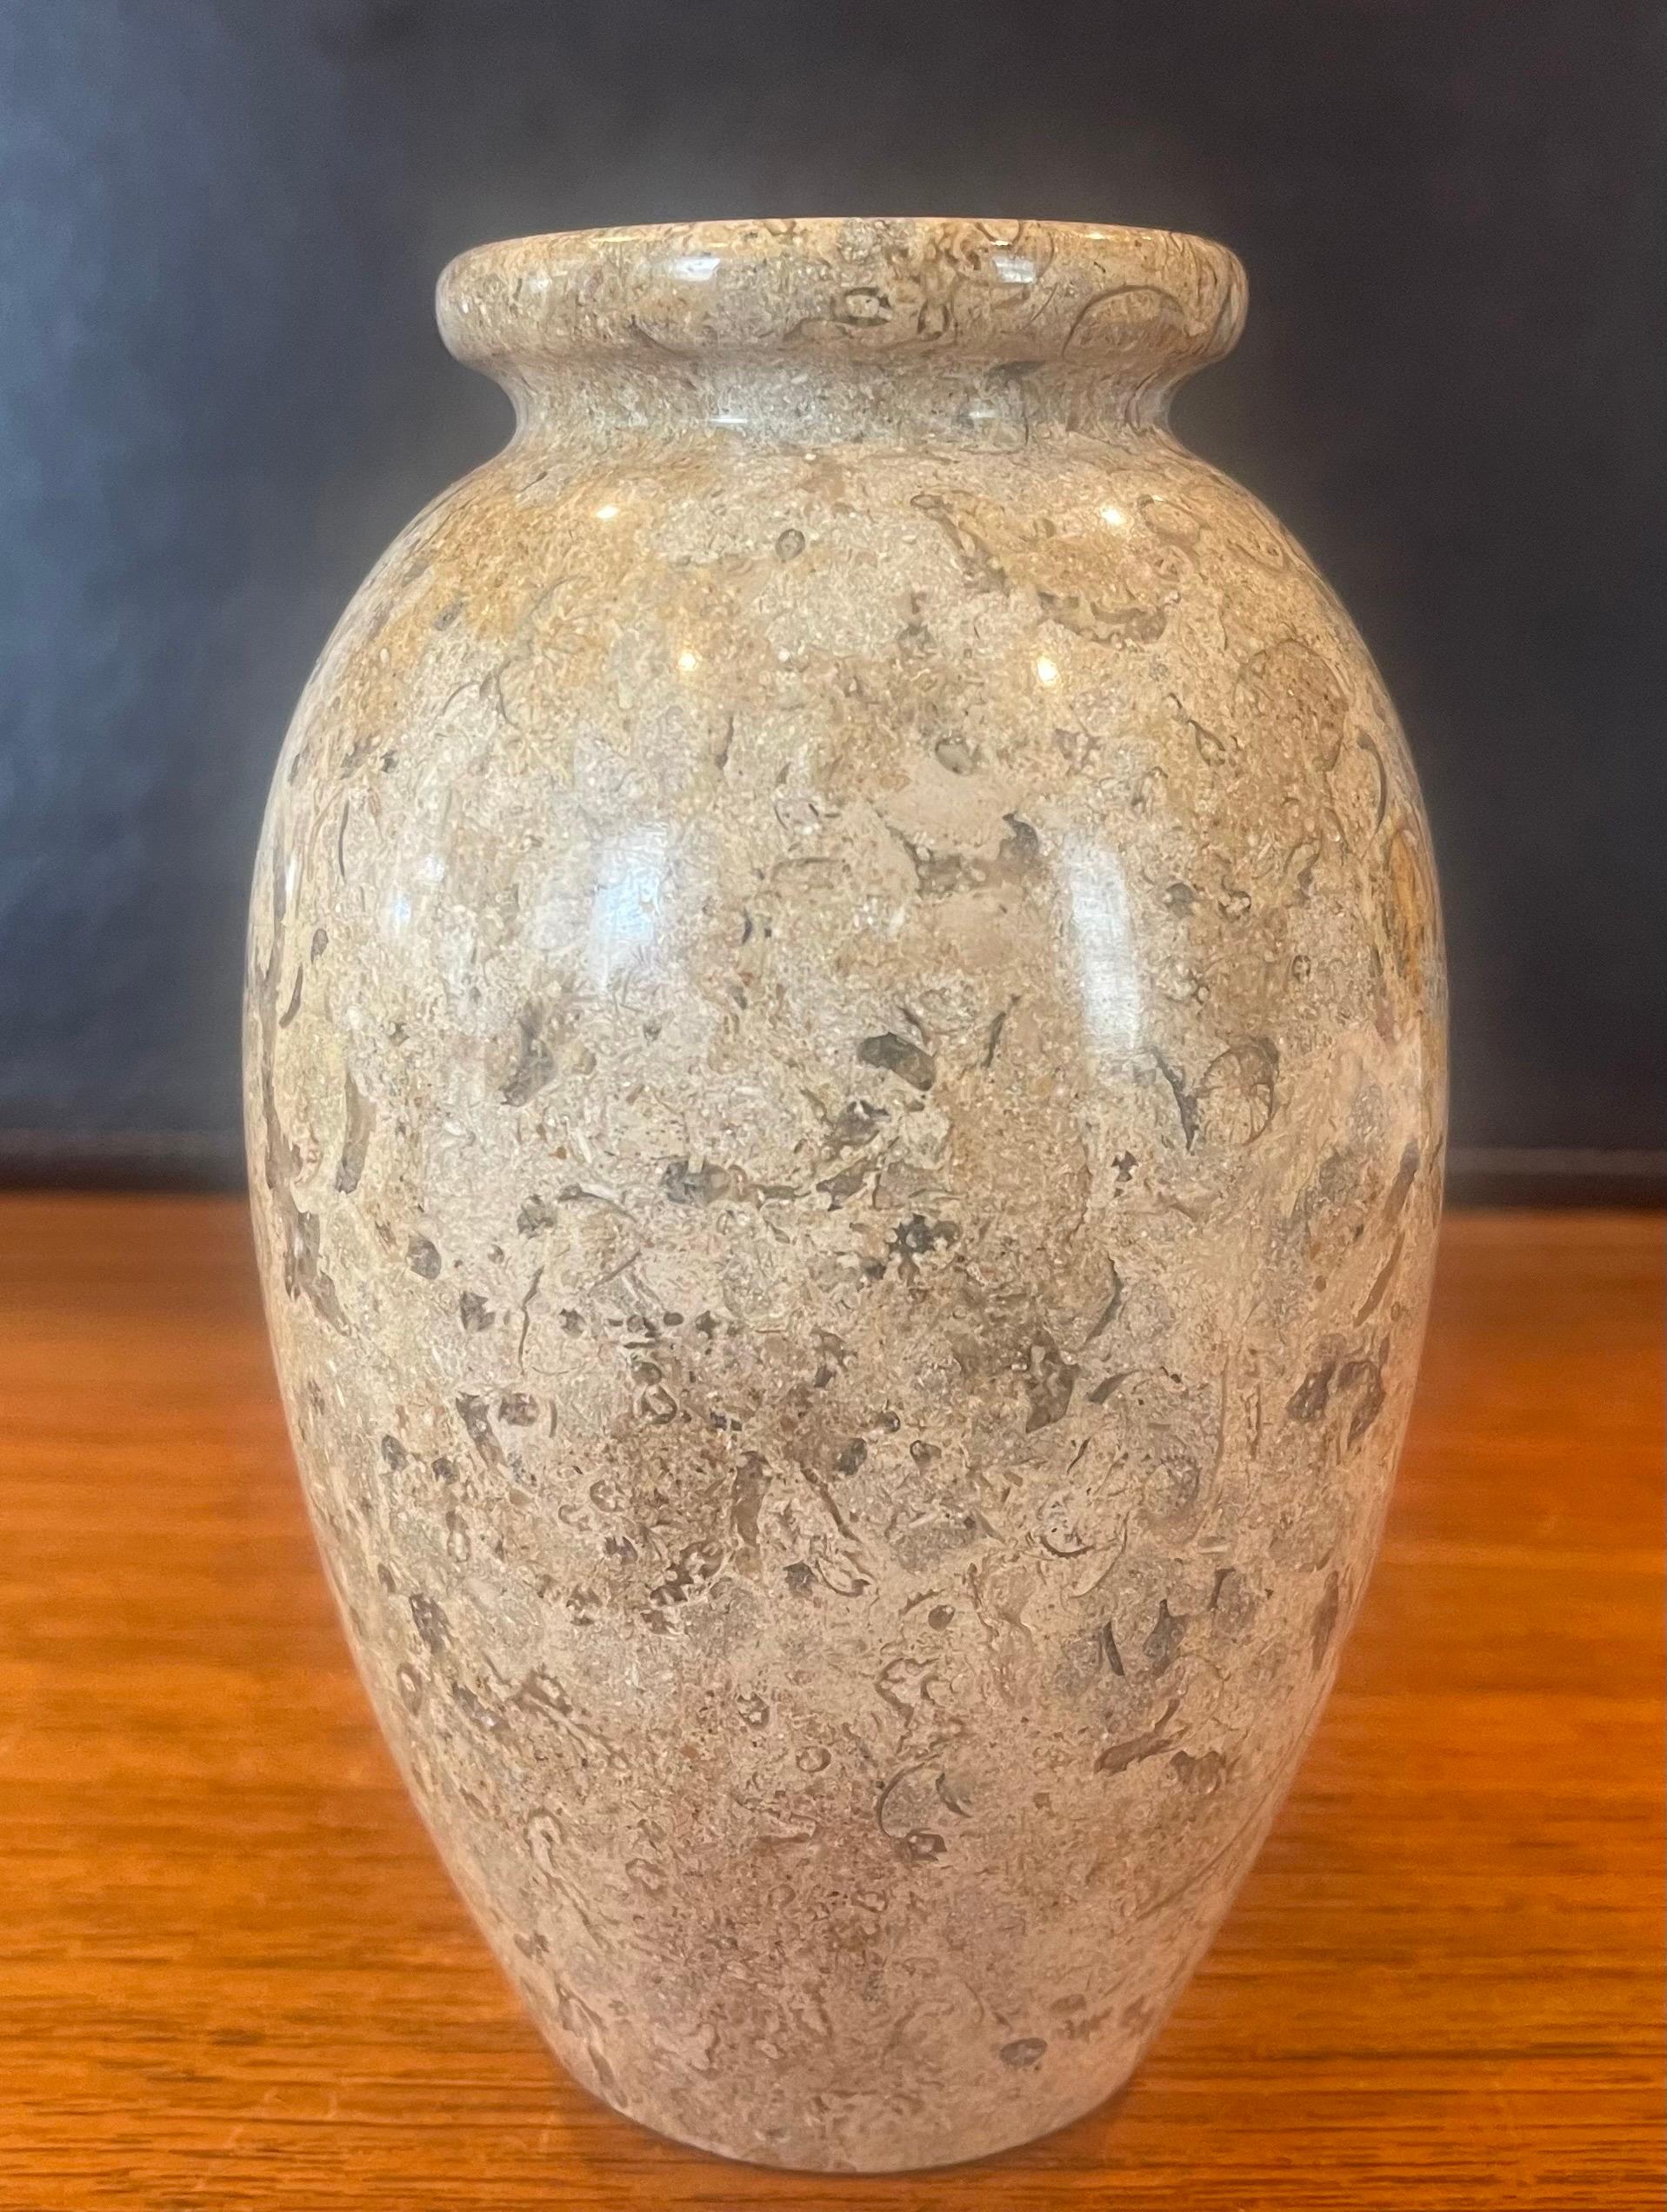 Small post-modern Italian marble vase, circa 1980s. The vase is primarily a dark tan in color, but has cream, black and grey veining throughout. The vase is in very good vintage condition with no chips or cracks and measures 4